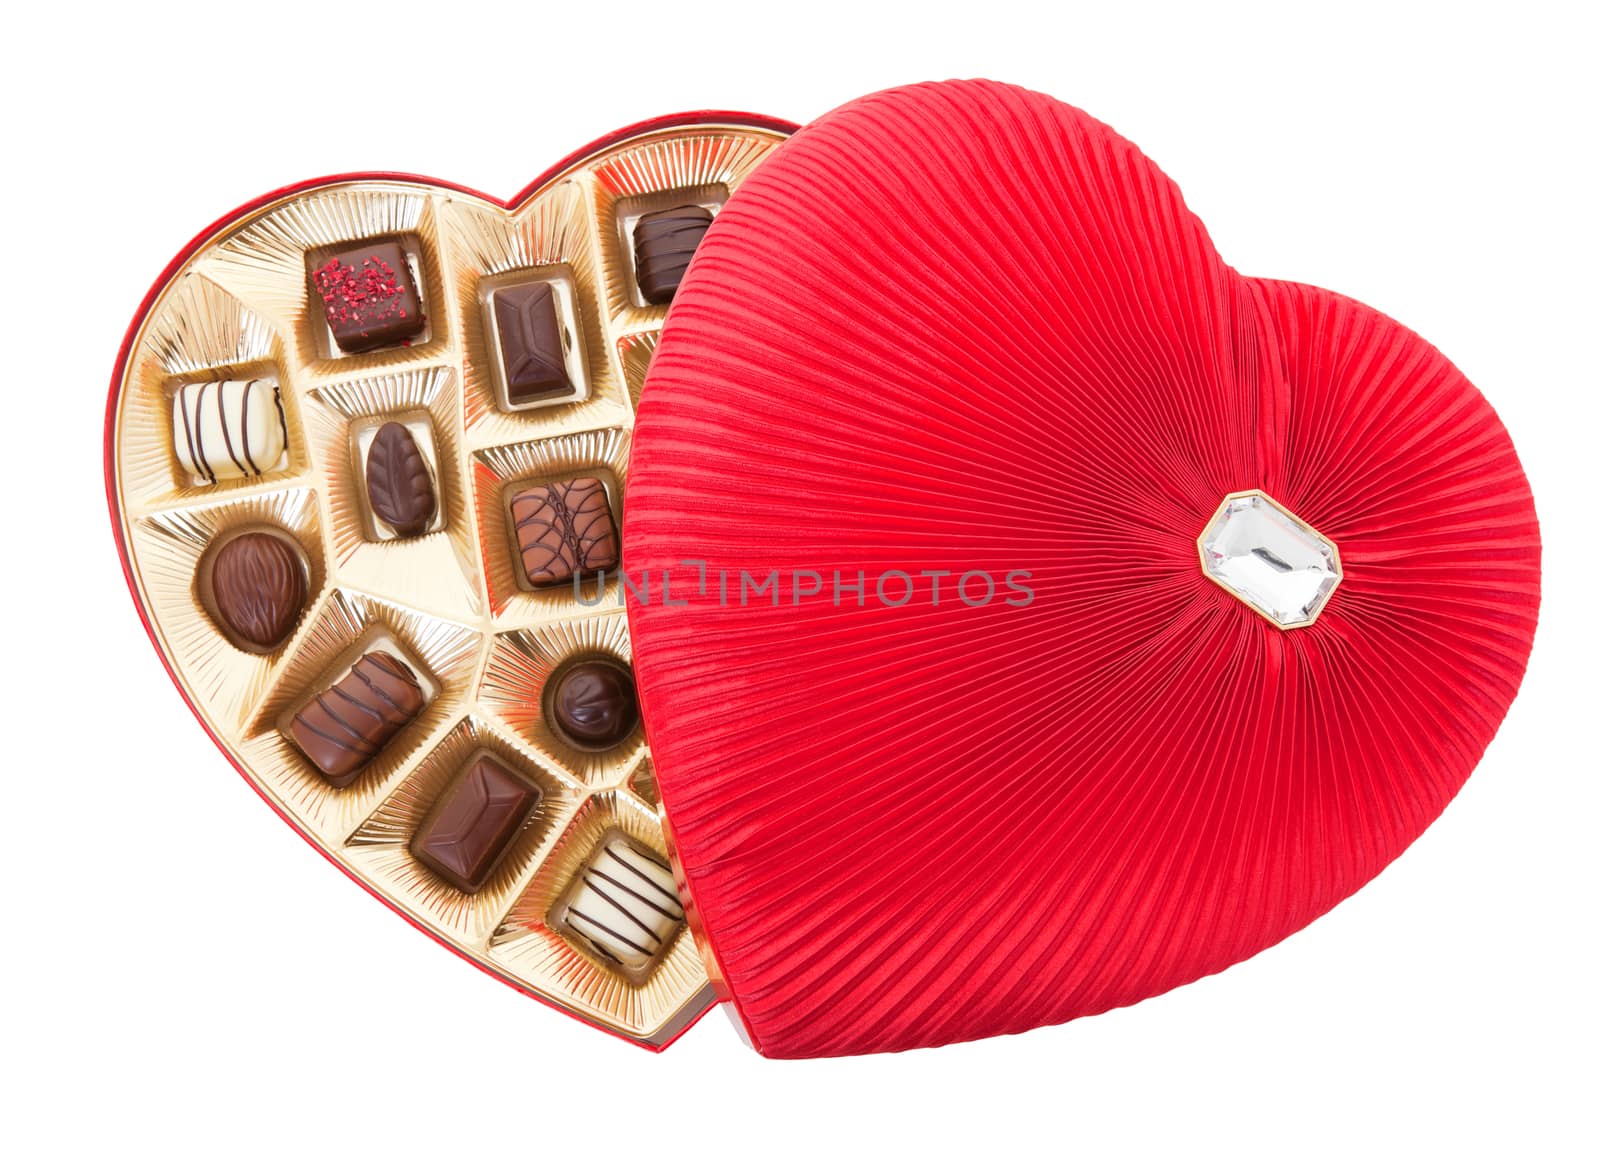 A delicately pleated, red satin, heart shaped box of delicious gourmet chocolates for Valentine's Day.  Isolated with clipping path.